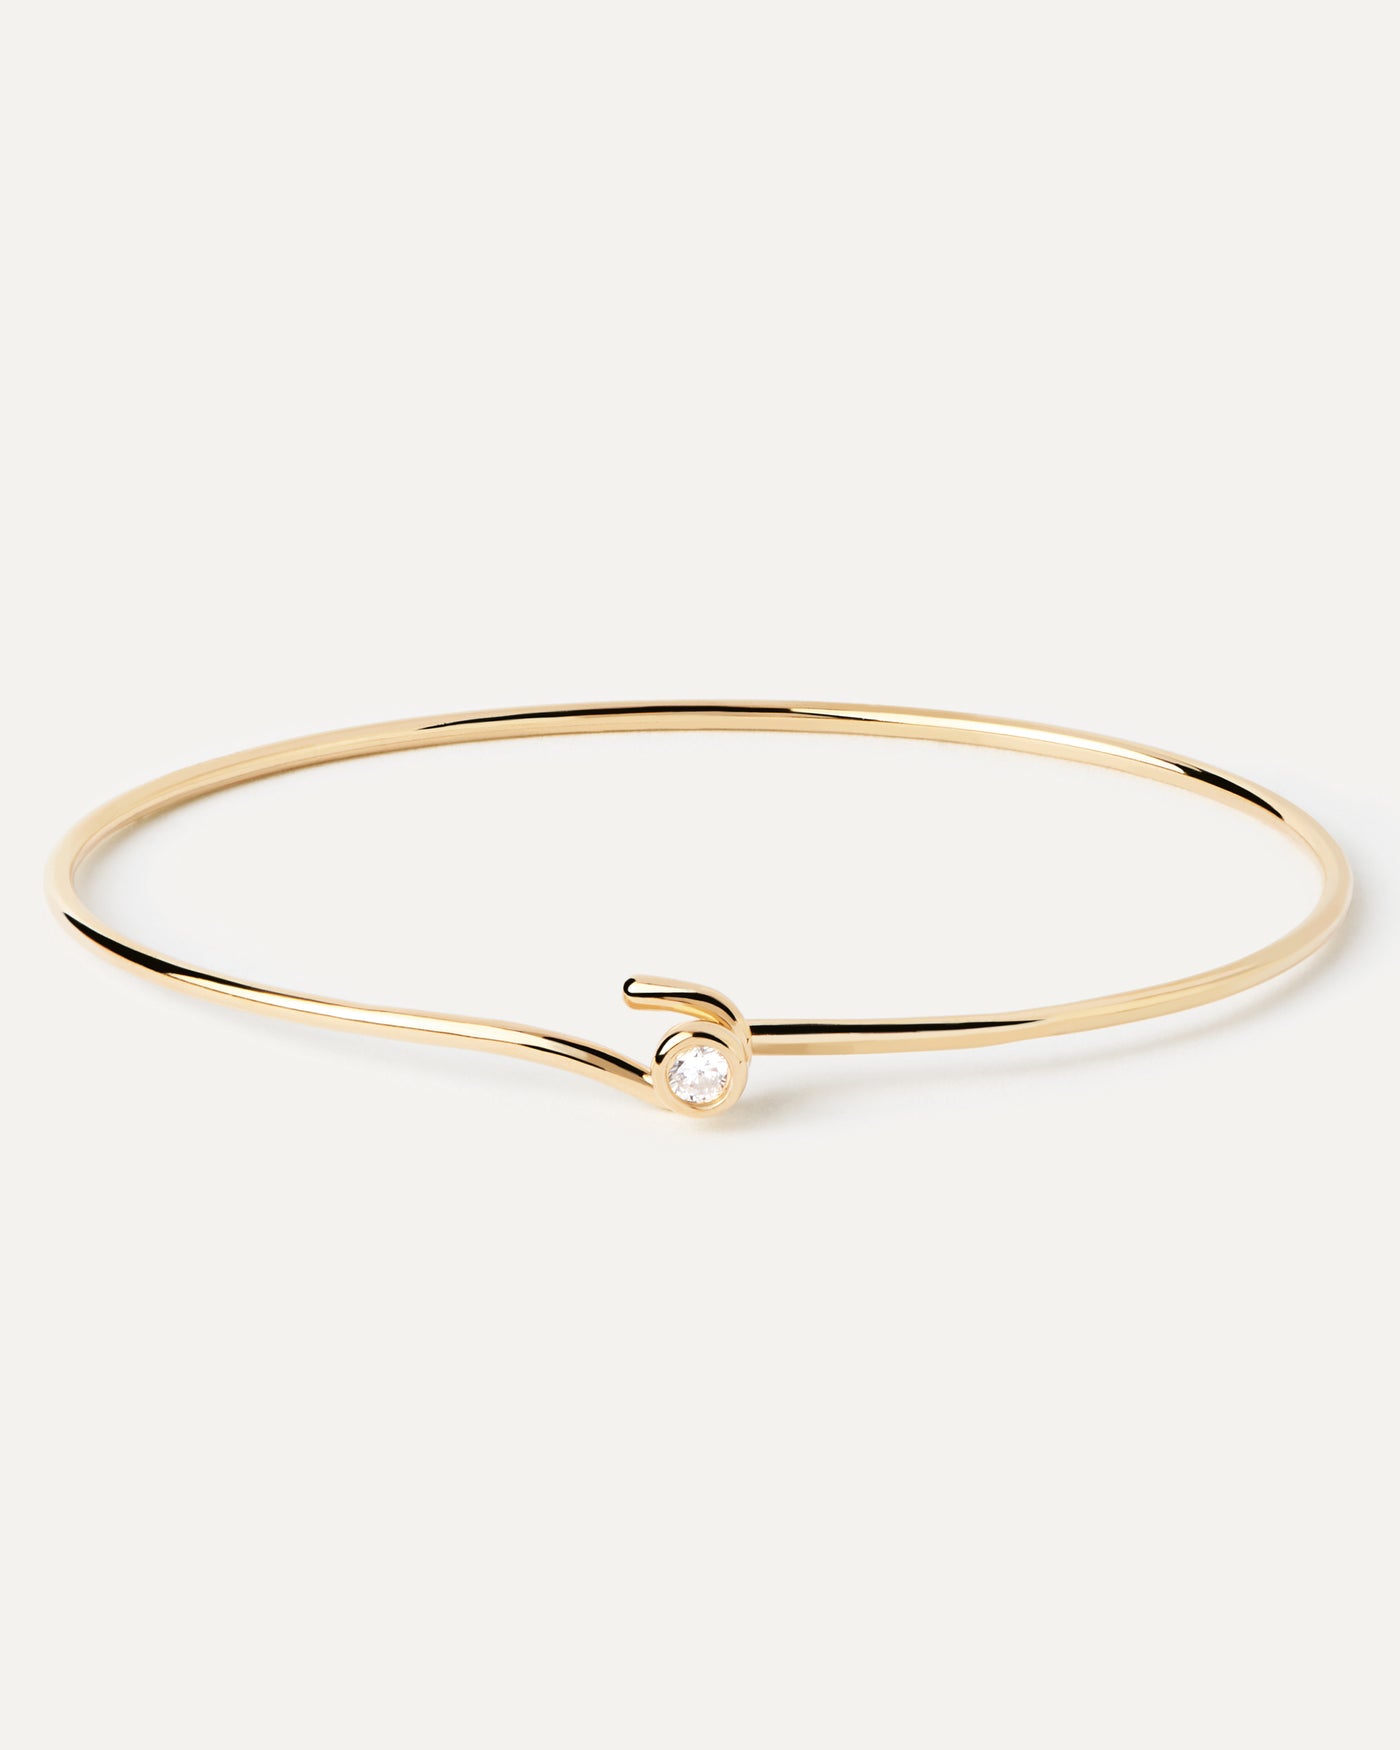 2023 Selection | Siena Bangle. Gold-plated hinged bangle with a band of rectangular cut white zirconia. Get the latest arrival from PDPAOLA. Place your order safely and get this Best Seller. Free Shipping.